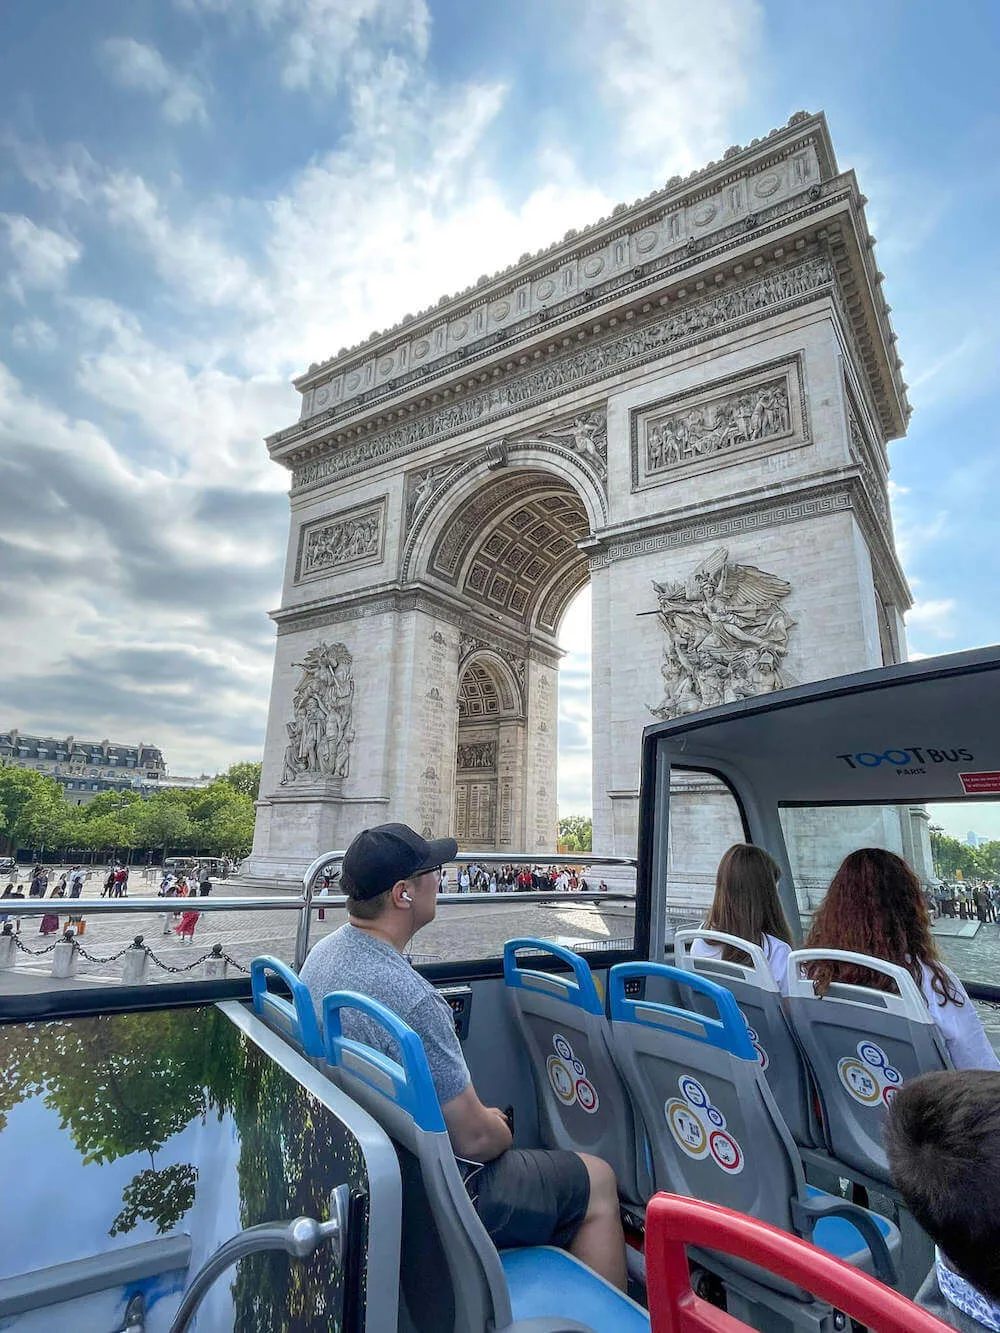 Image of a man on a double decker bus in front of the Arc de Triomphe